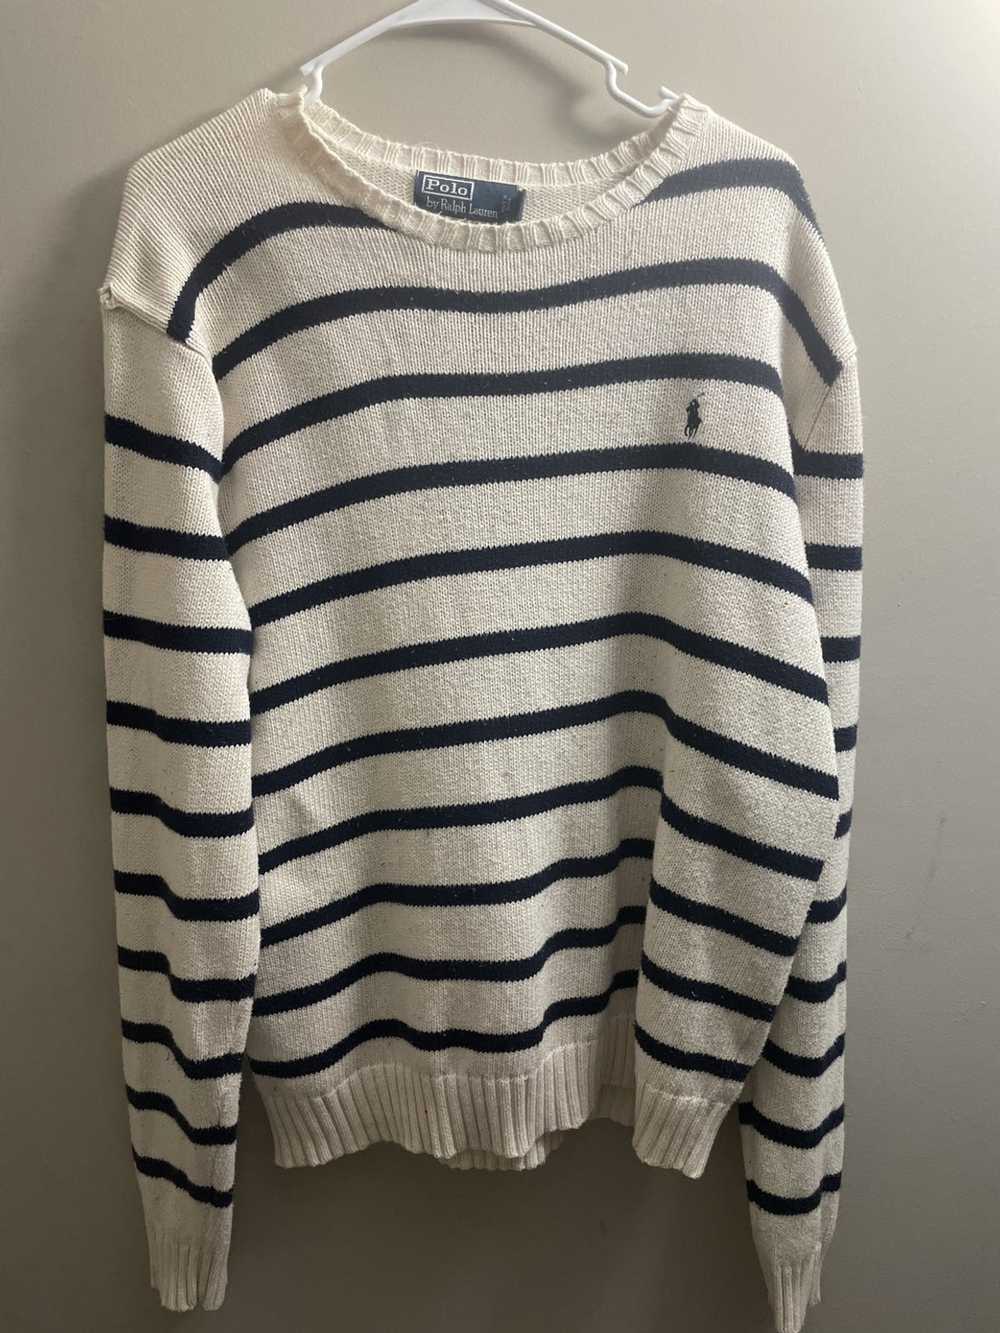 Polo Ralph Lauren Polo Knit Sweater L - image 1